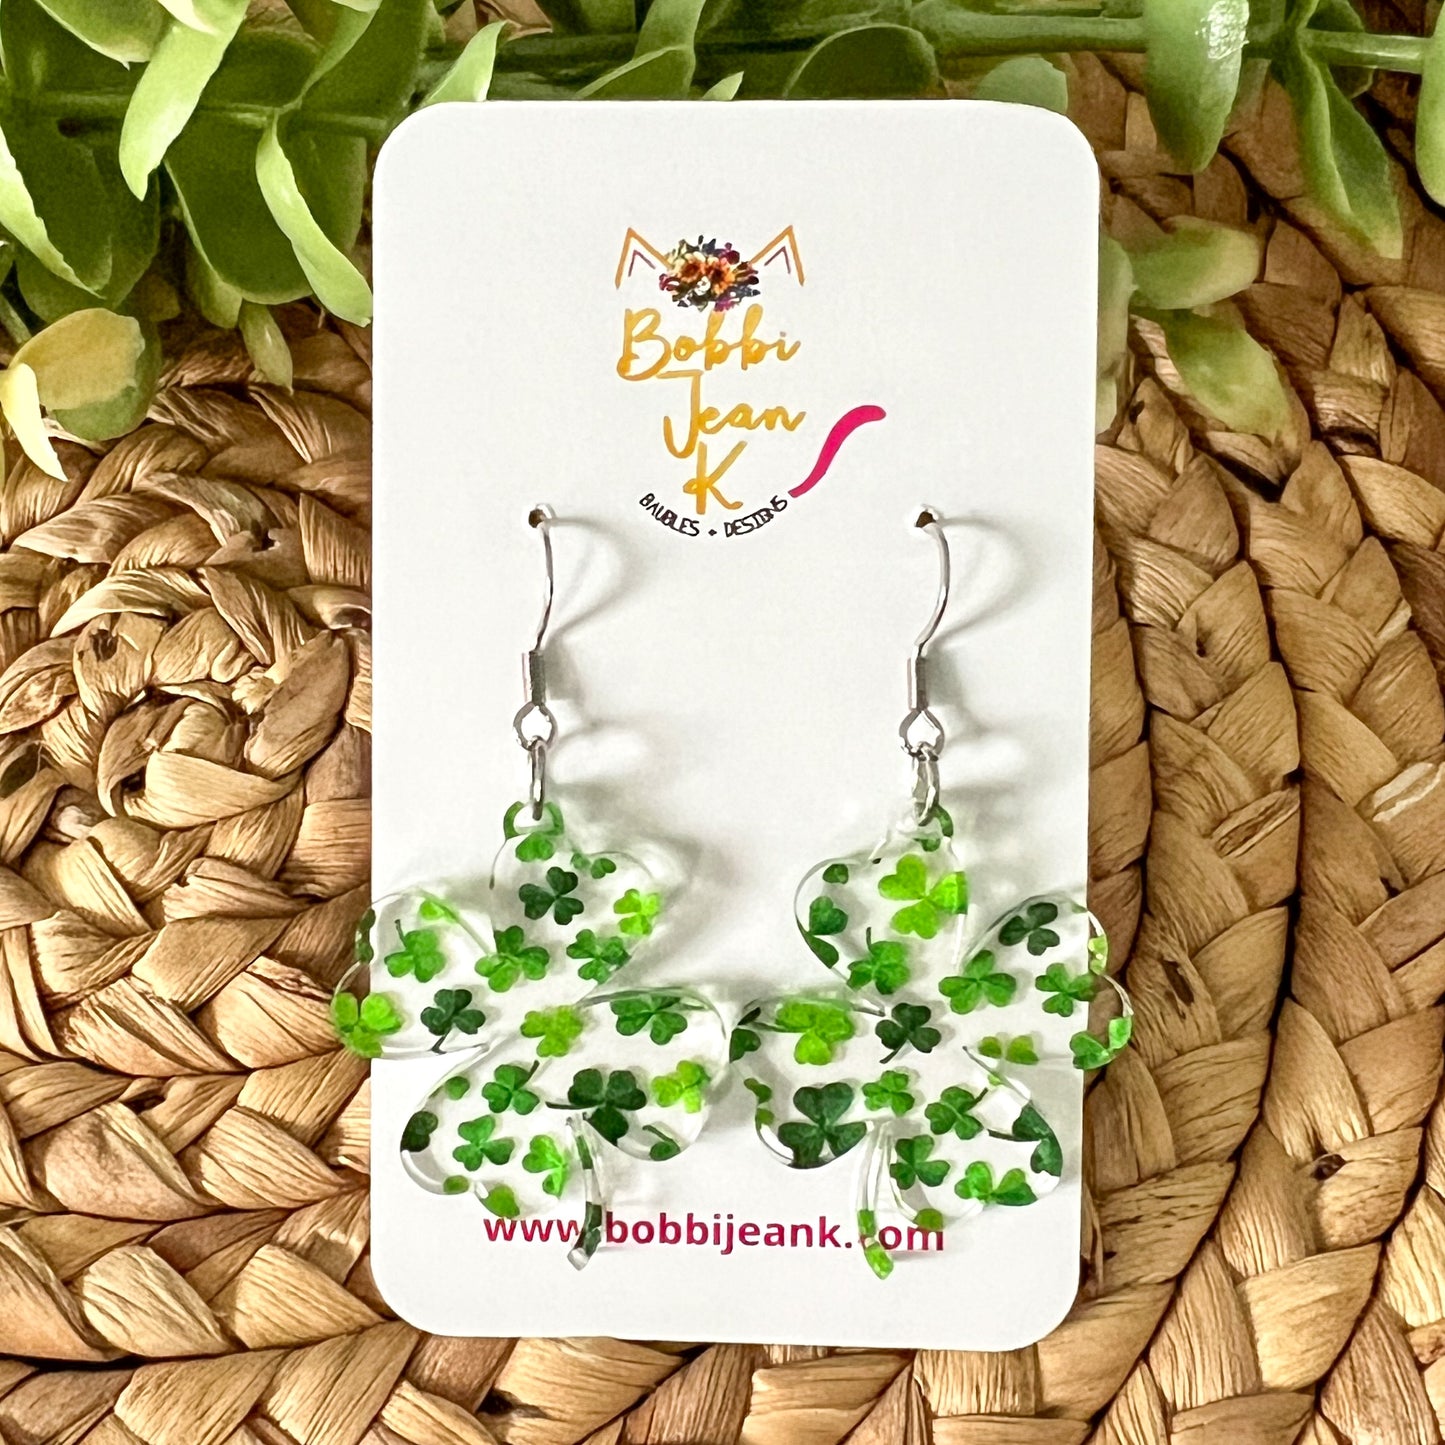 Scattered Clover Clear Acrylic Earrings: Choose From 2 Styles